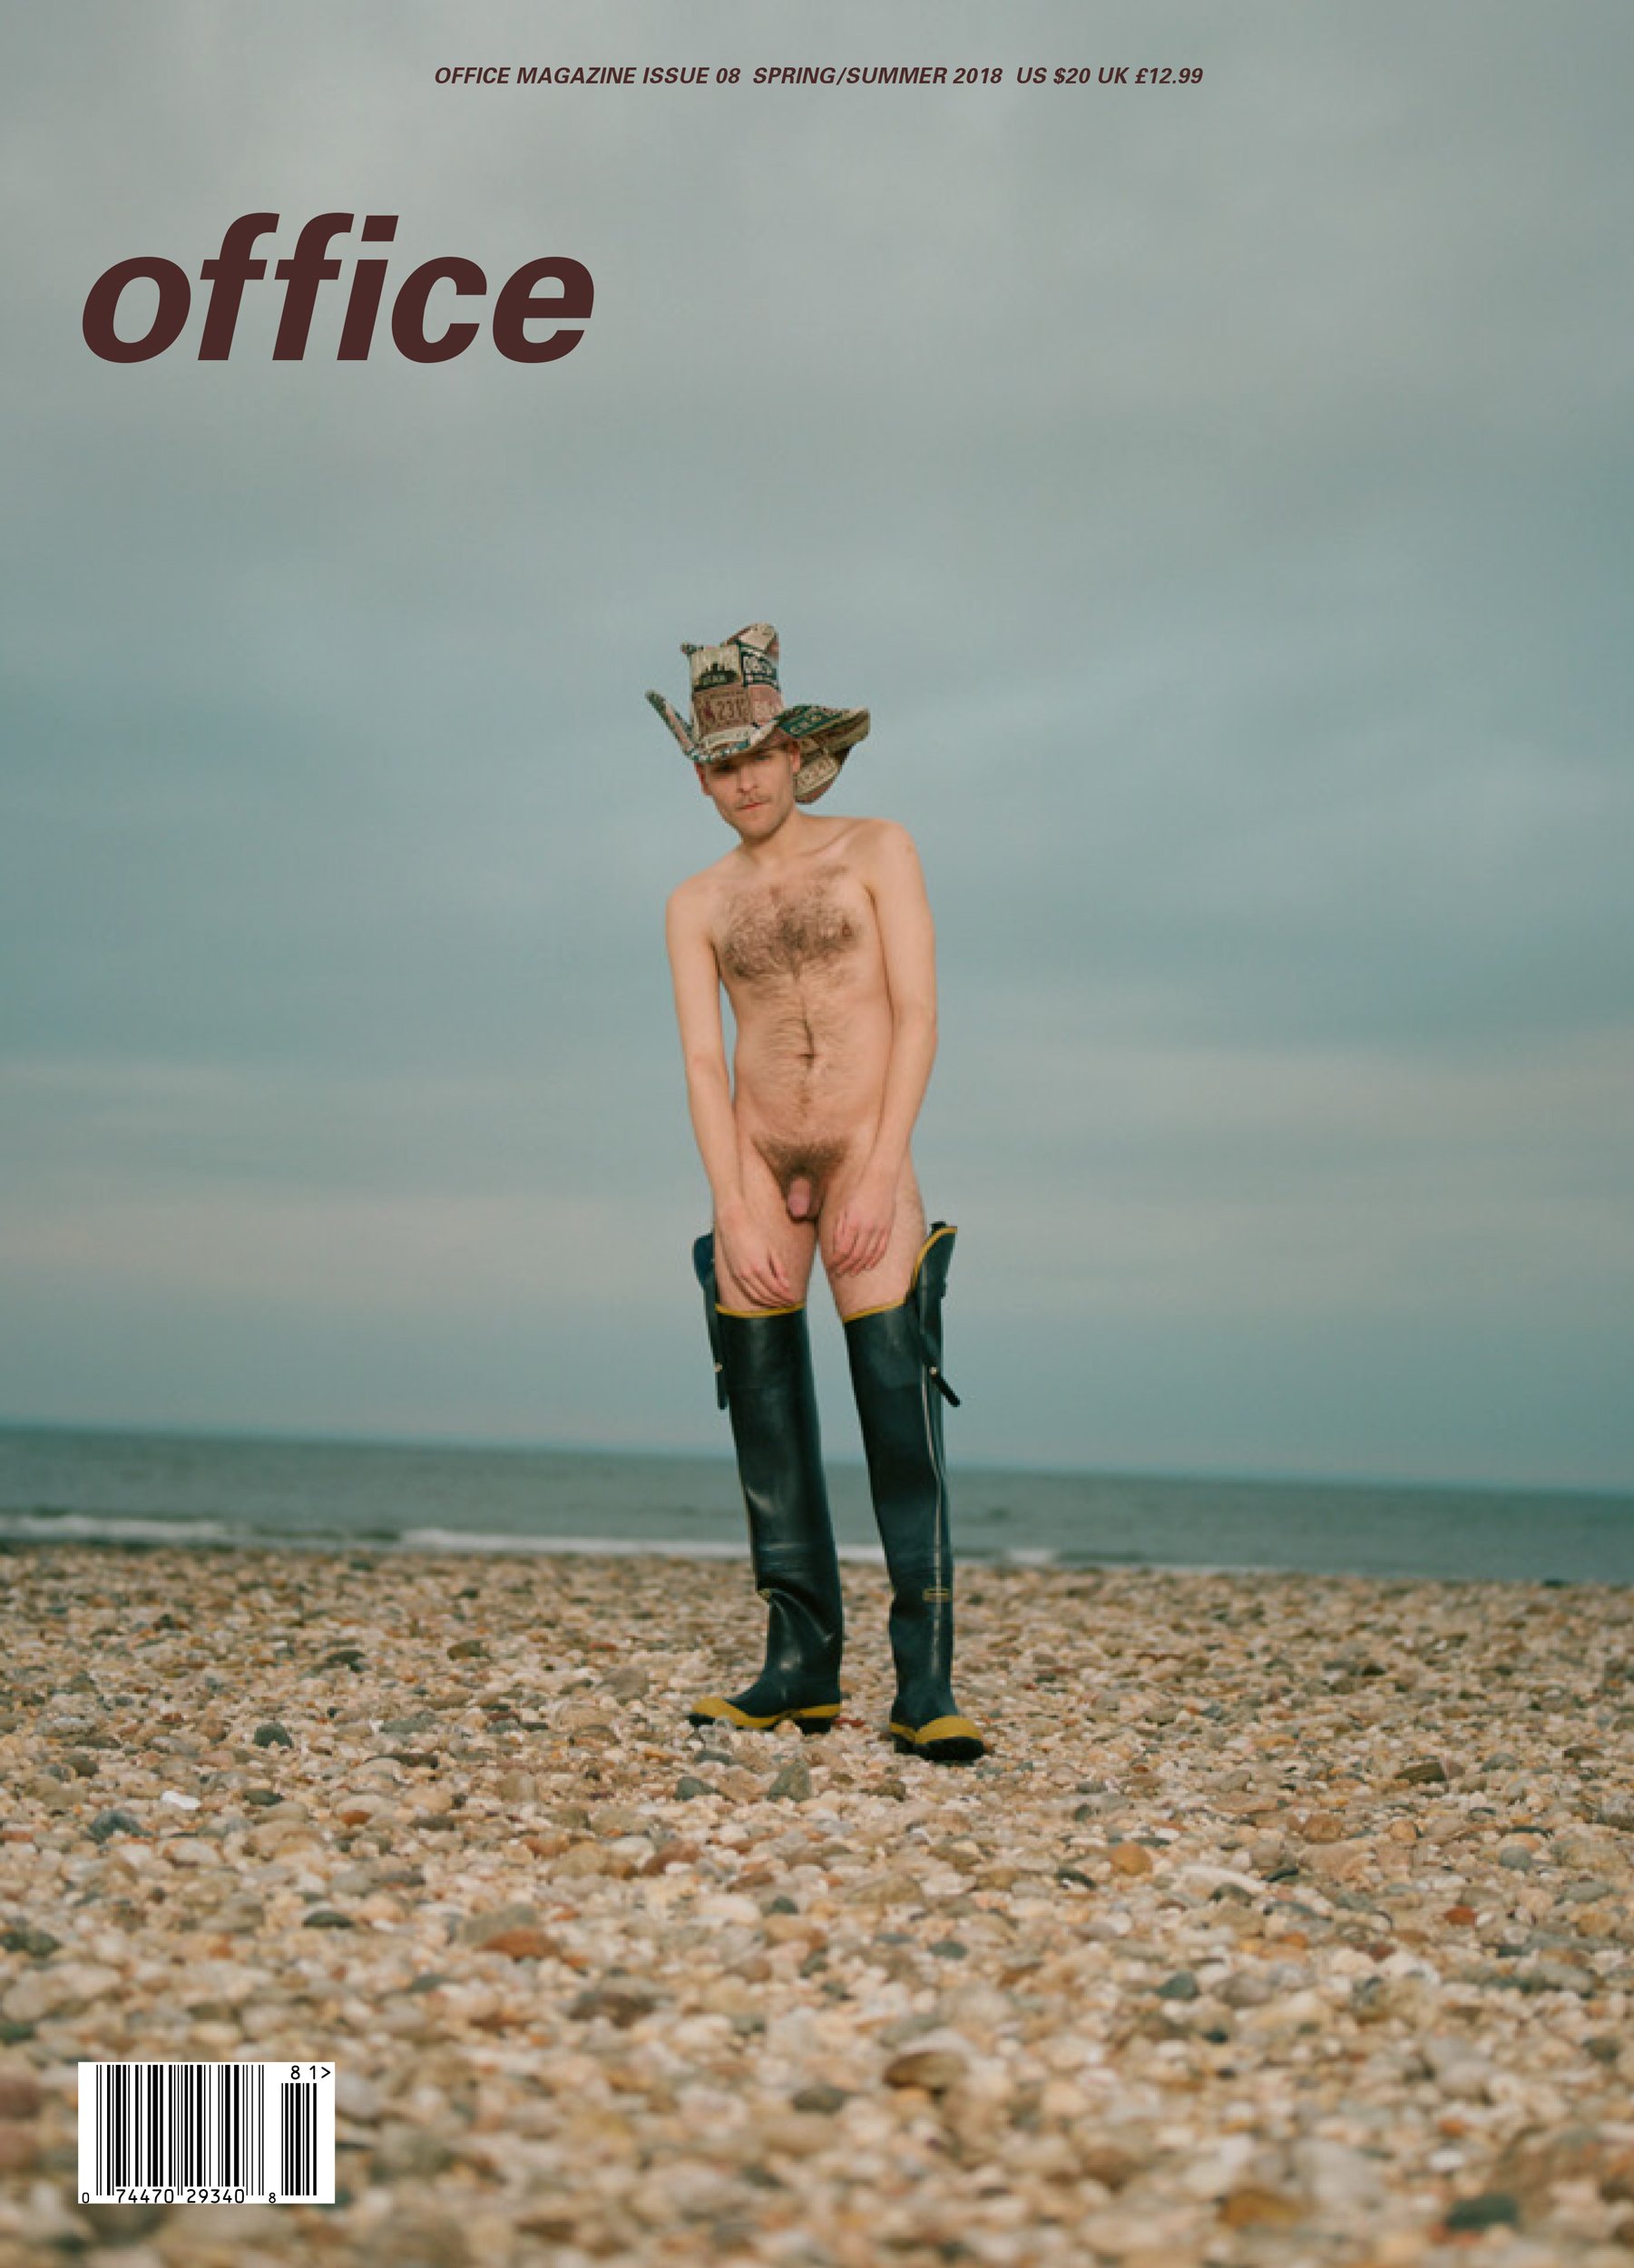  office Issue 08 